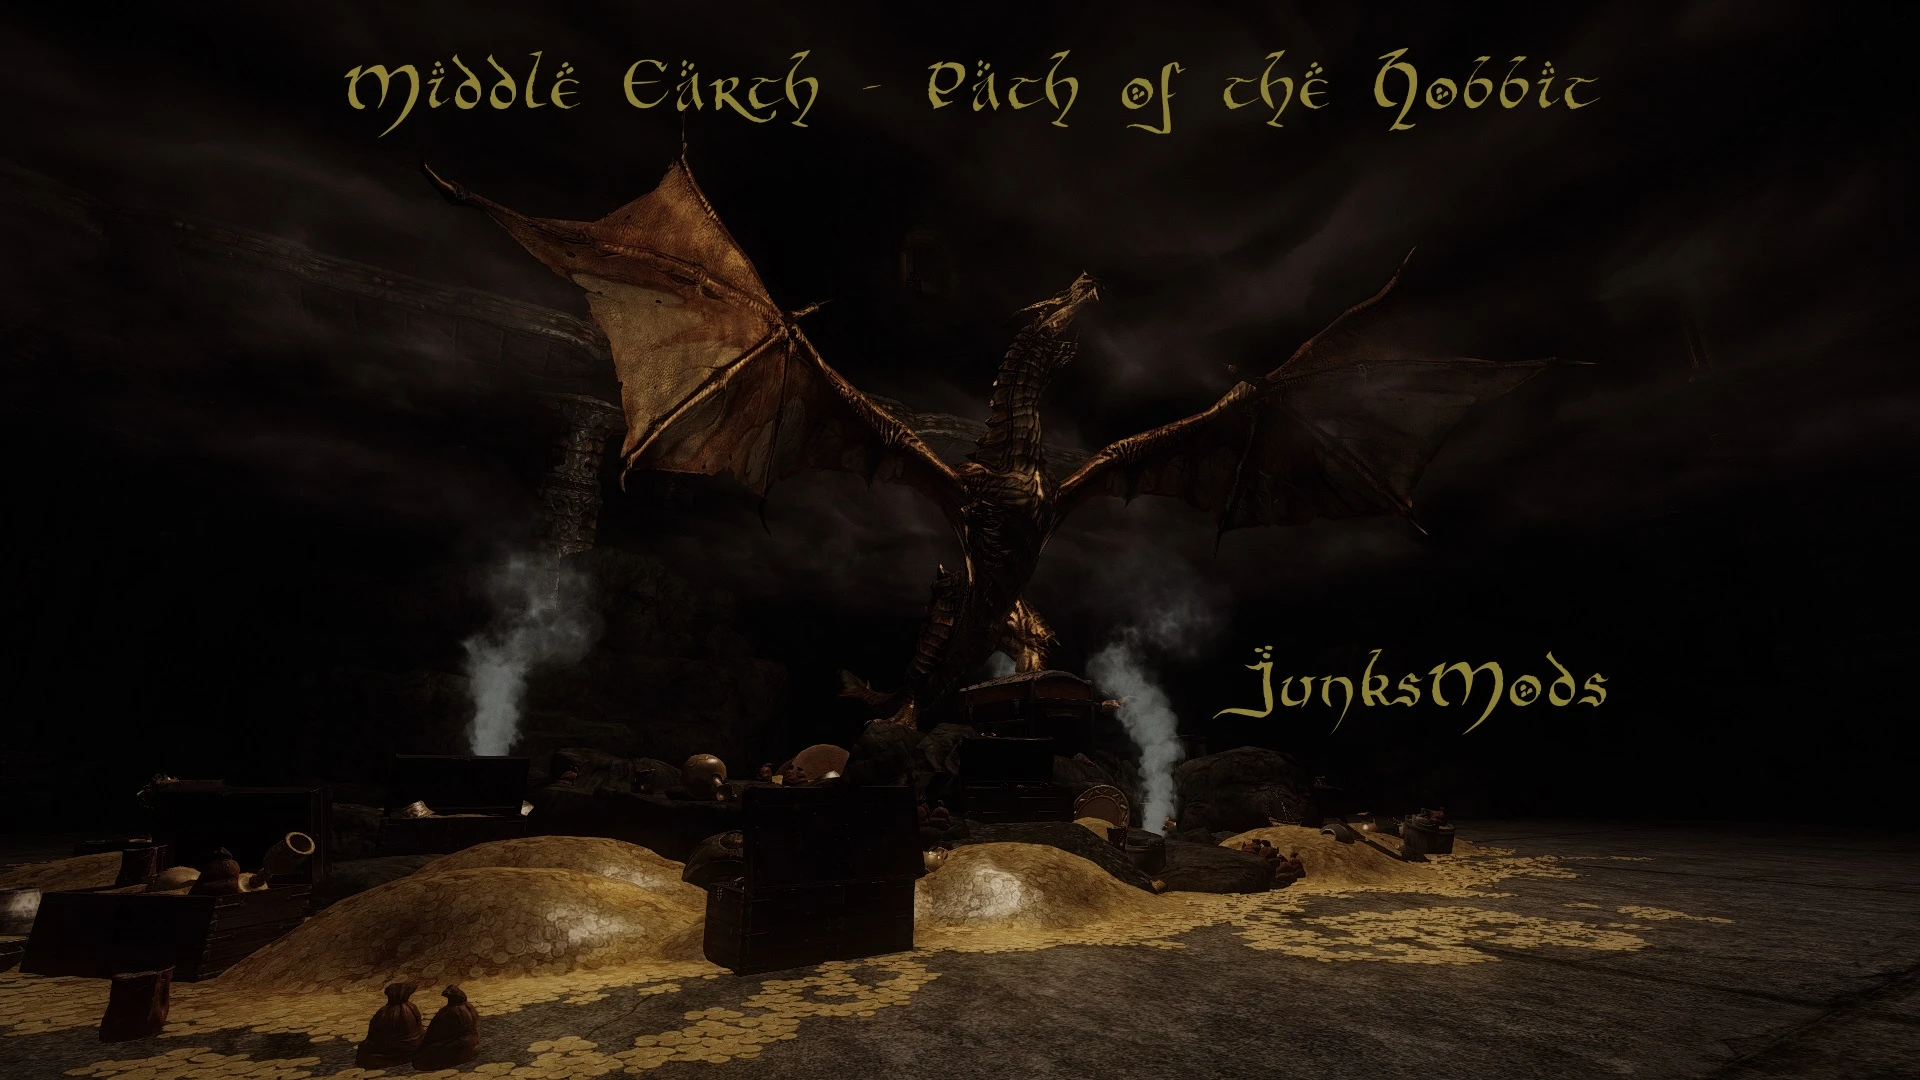 Middle Earth Path Of The Hobbit At Skyrim Nexus Mods And Community Images, Photos, Reviews